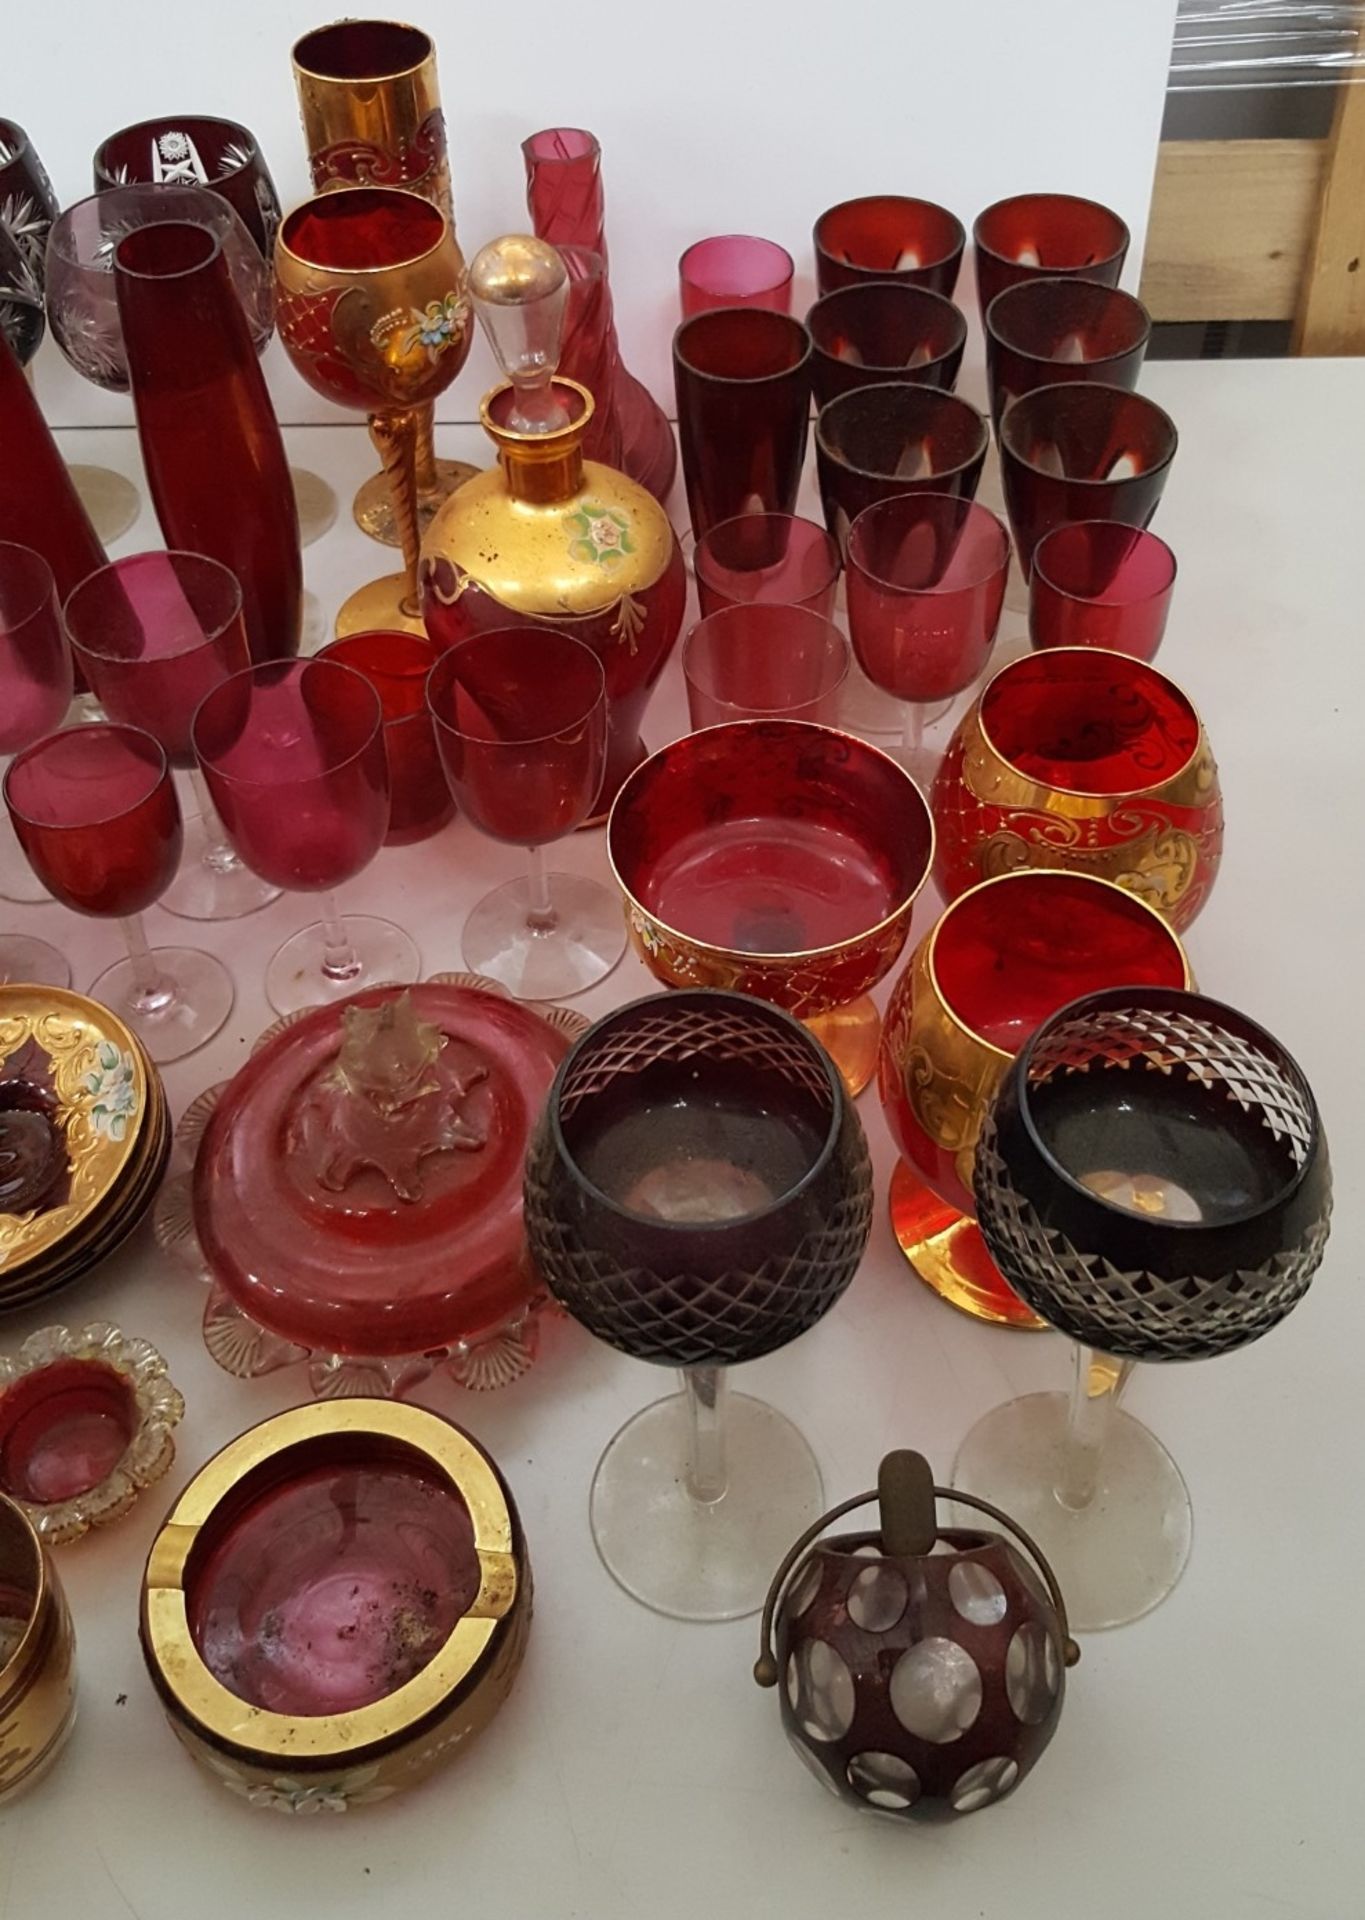 1 x Joblot Of 60+ Pieces Of Vintage Glasswear - Ref RB223 I - Image 3 of 7